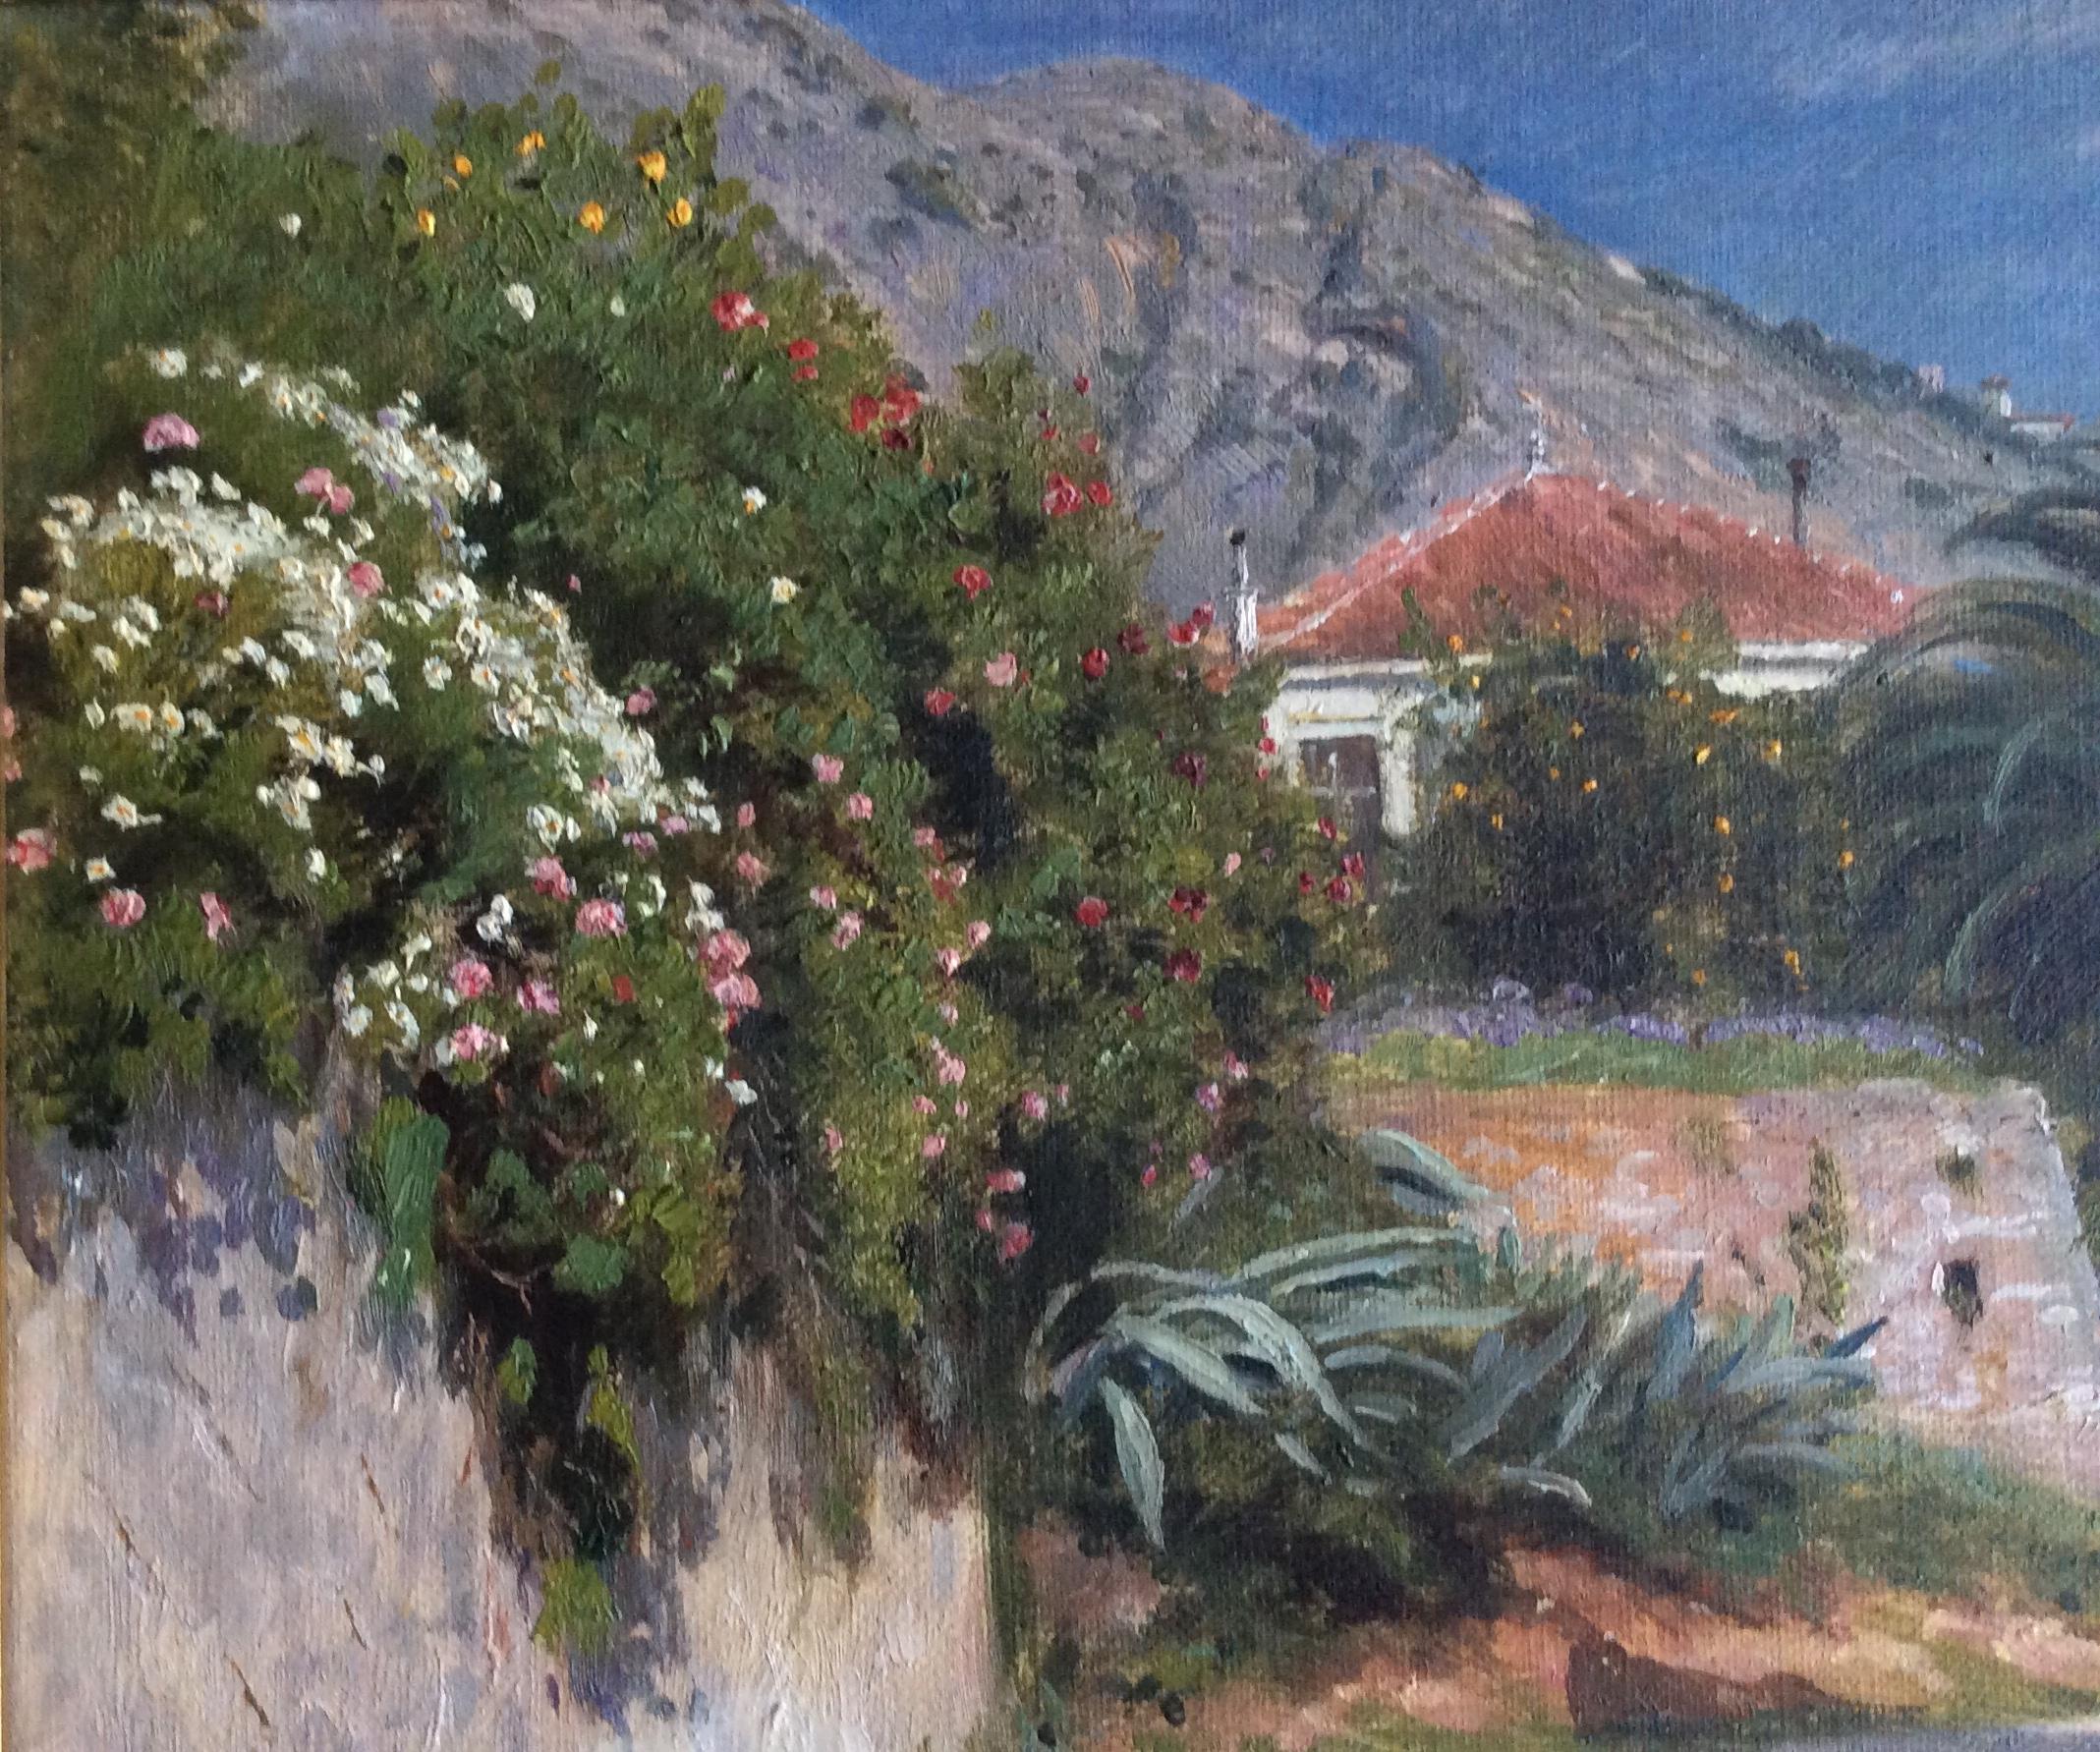 Christian Zacho a nice little painting from around Menton
Signed CZ 12 oil on canvas size with frame W 47 H 39 D5
All in cm, size without frame W35 H26
Christian Zacho born 1843-1913
More info in photos.